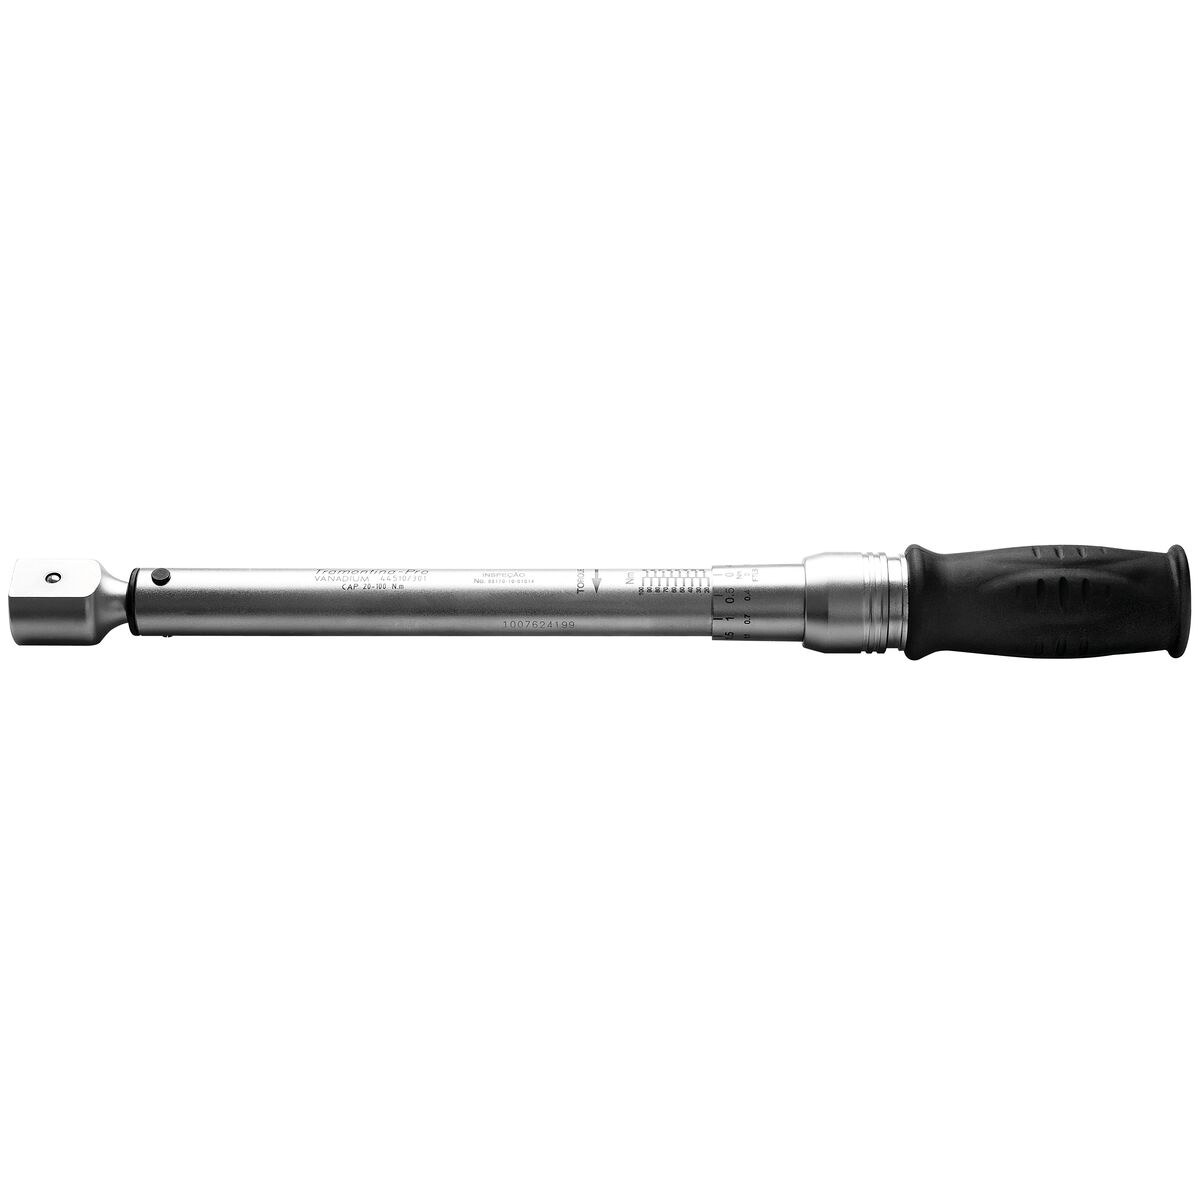 Interchangeable Heads for Torque Wrenches